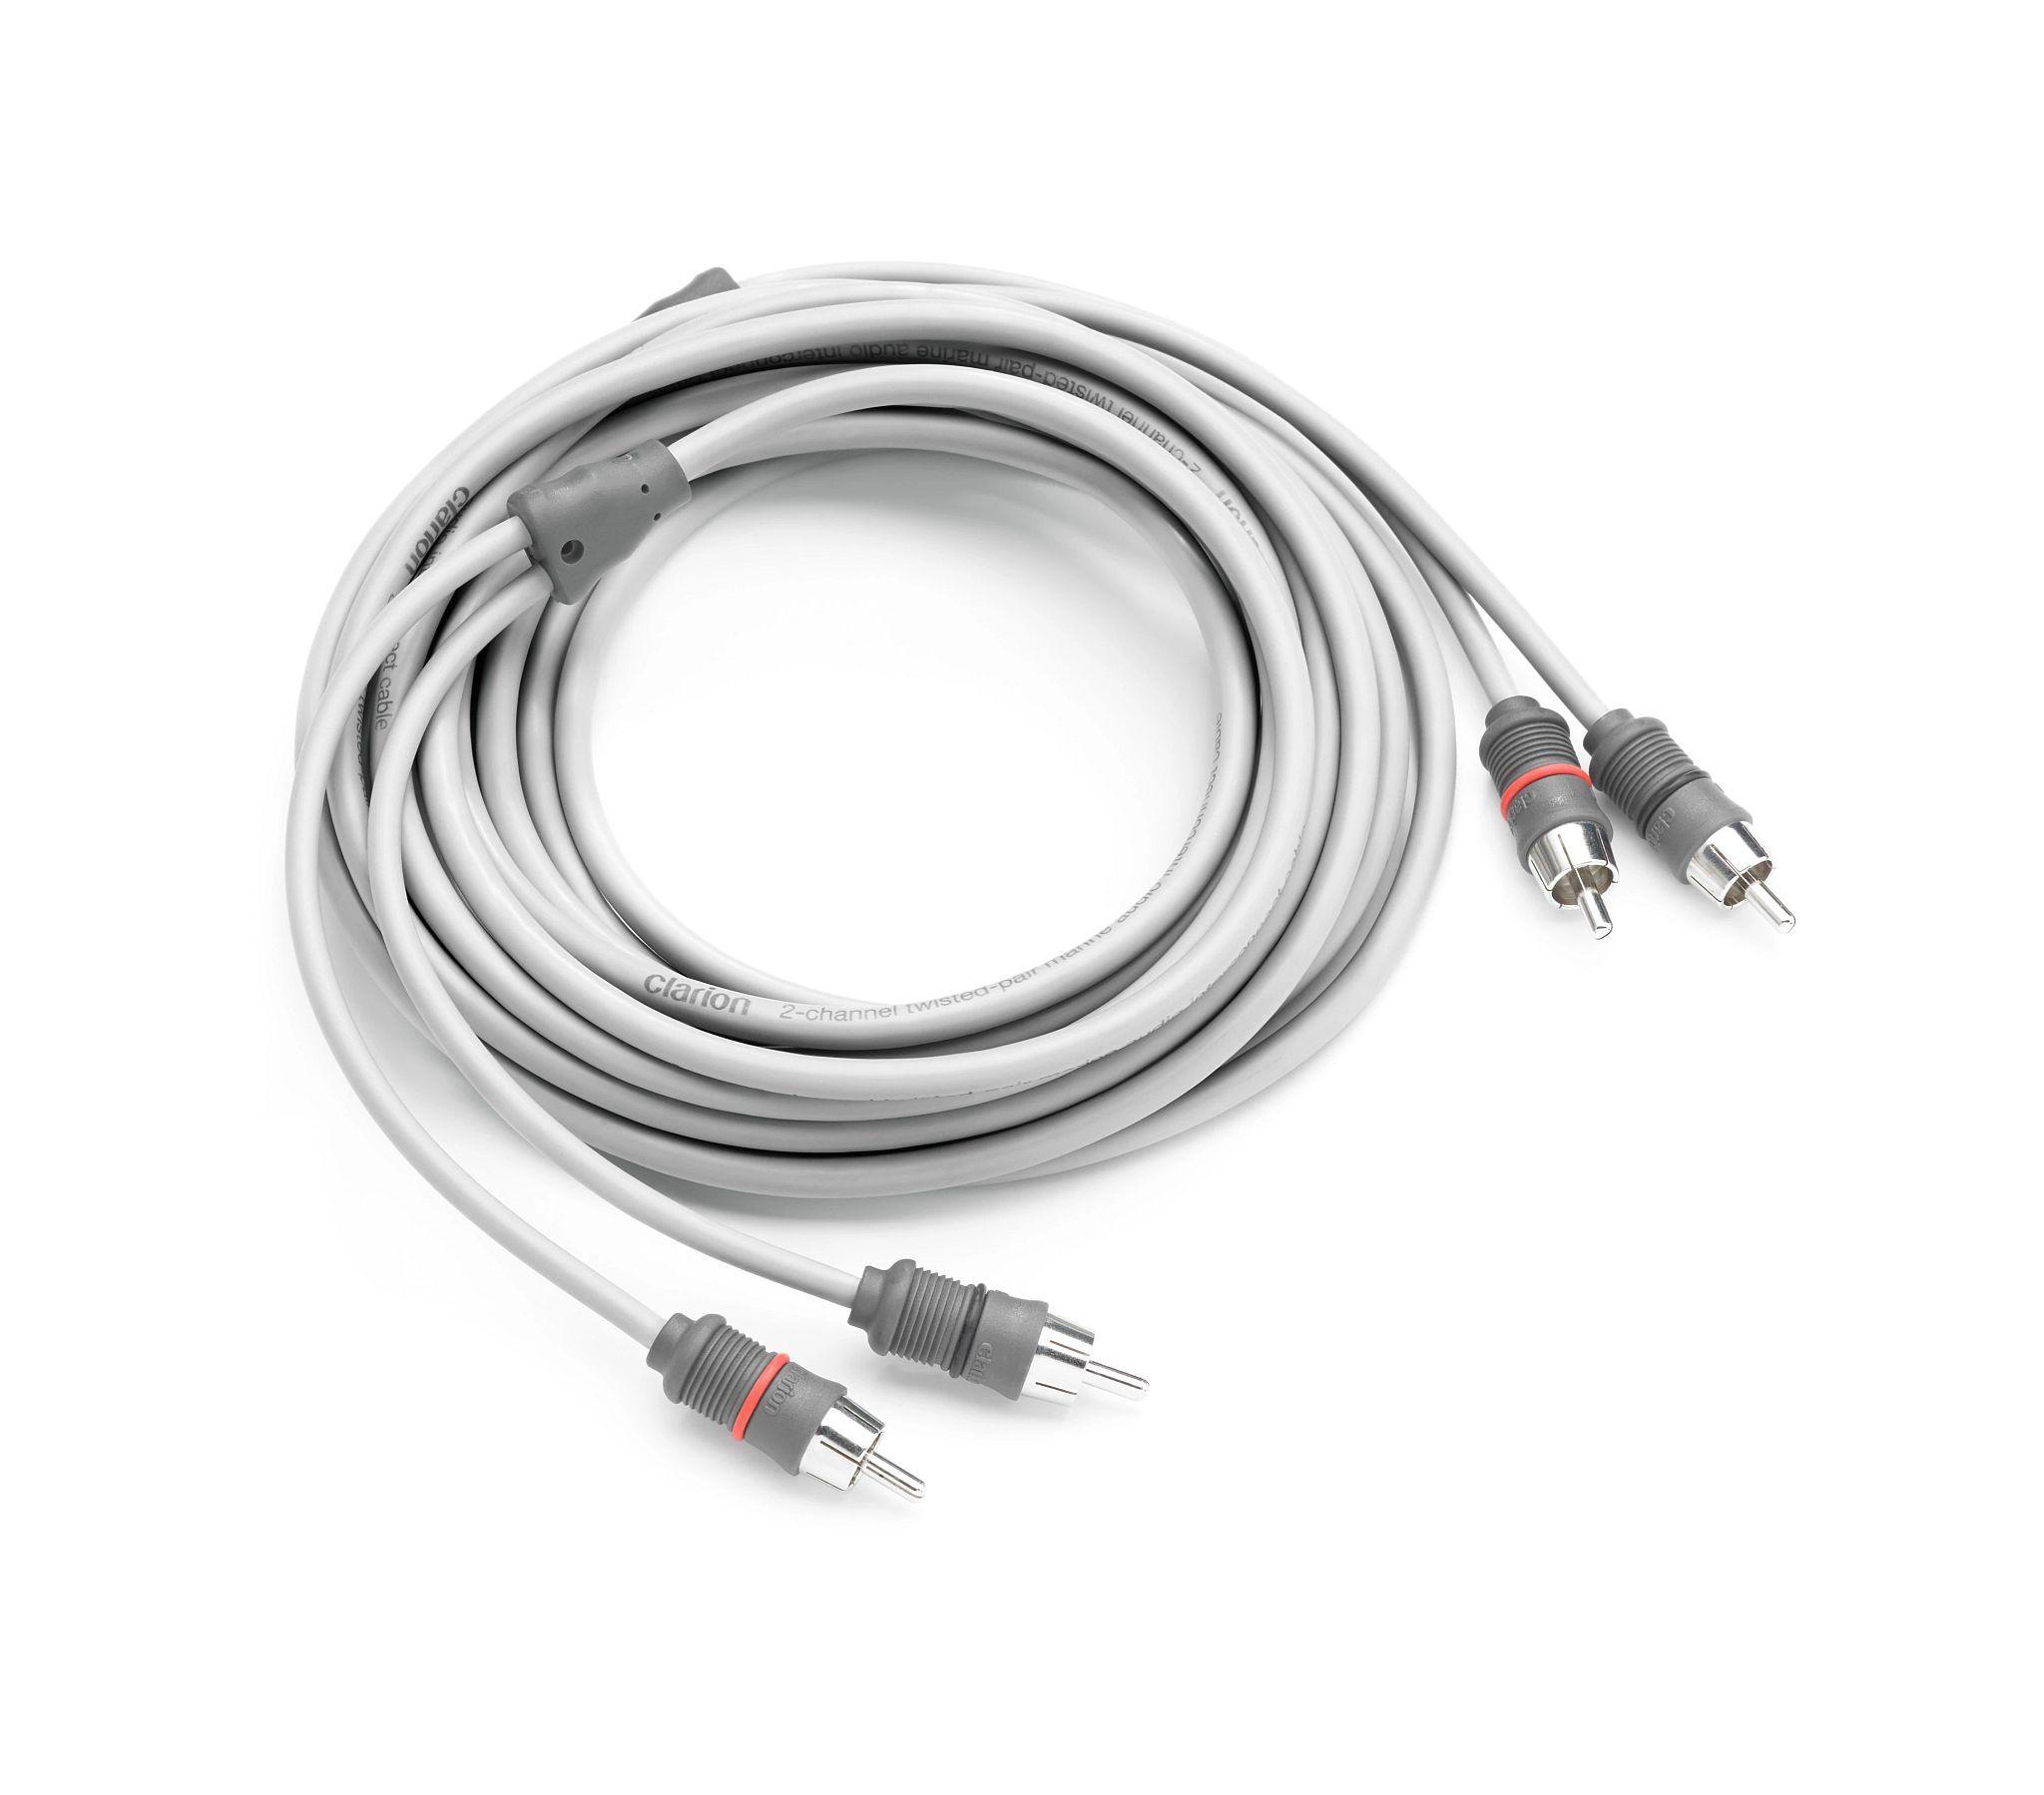 CLARION 2-ch Twisted-Pair Marine Audio Interconnect w/ Molded Connectors – 18 ft. / 3.66 m | 92795